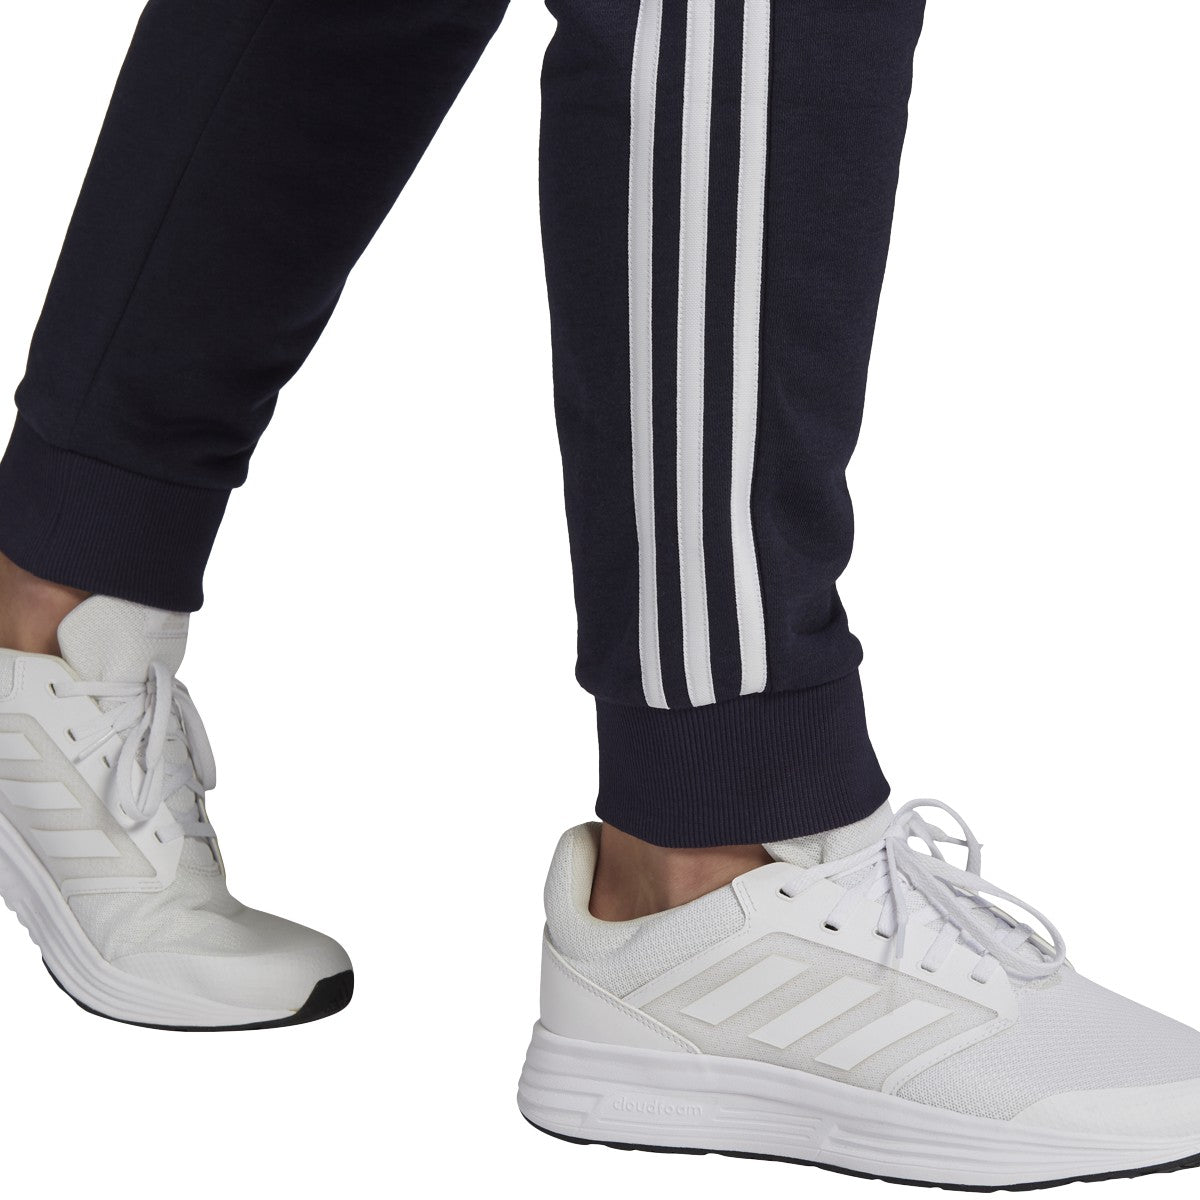 adidas,Womens,3-Stripes French Terry C Pants,Legend Ink/White,3X